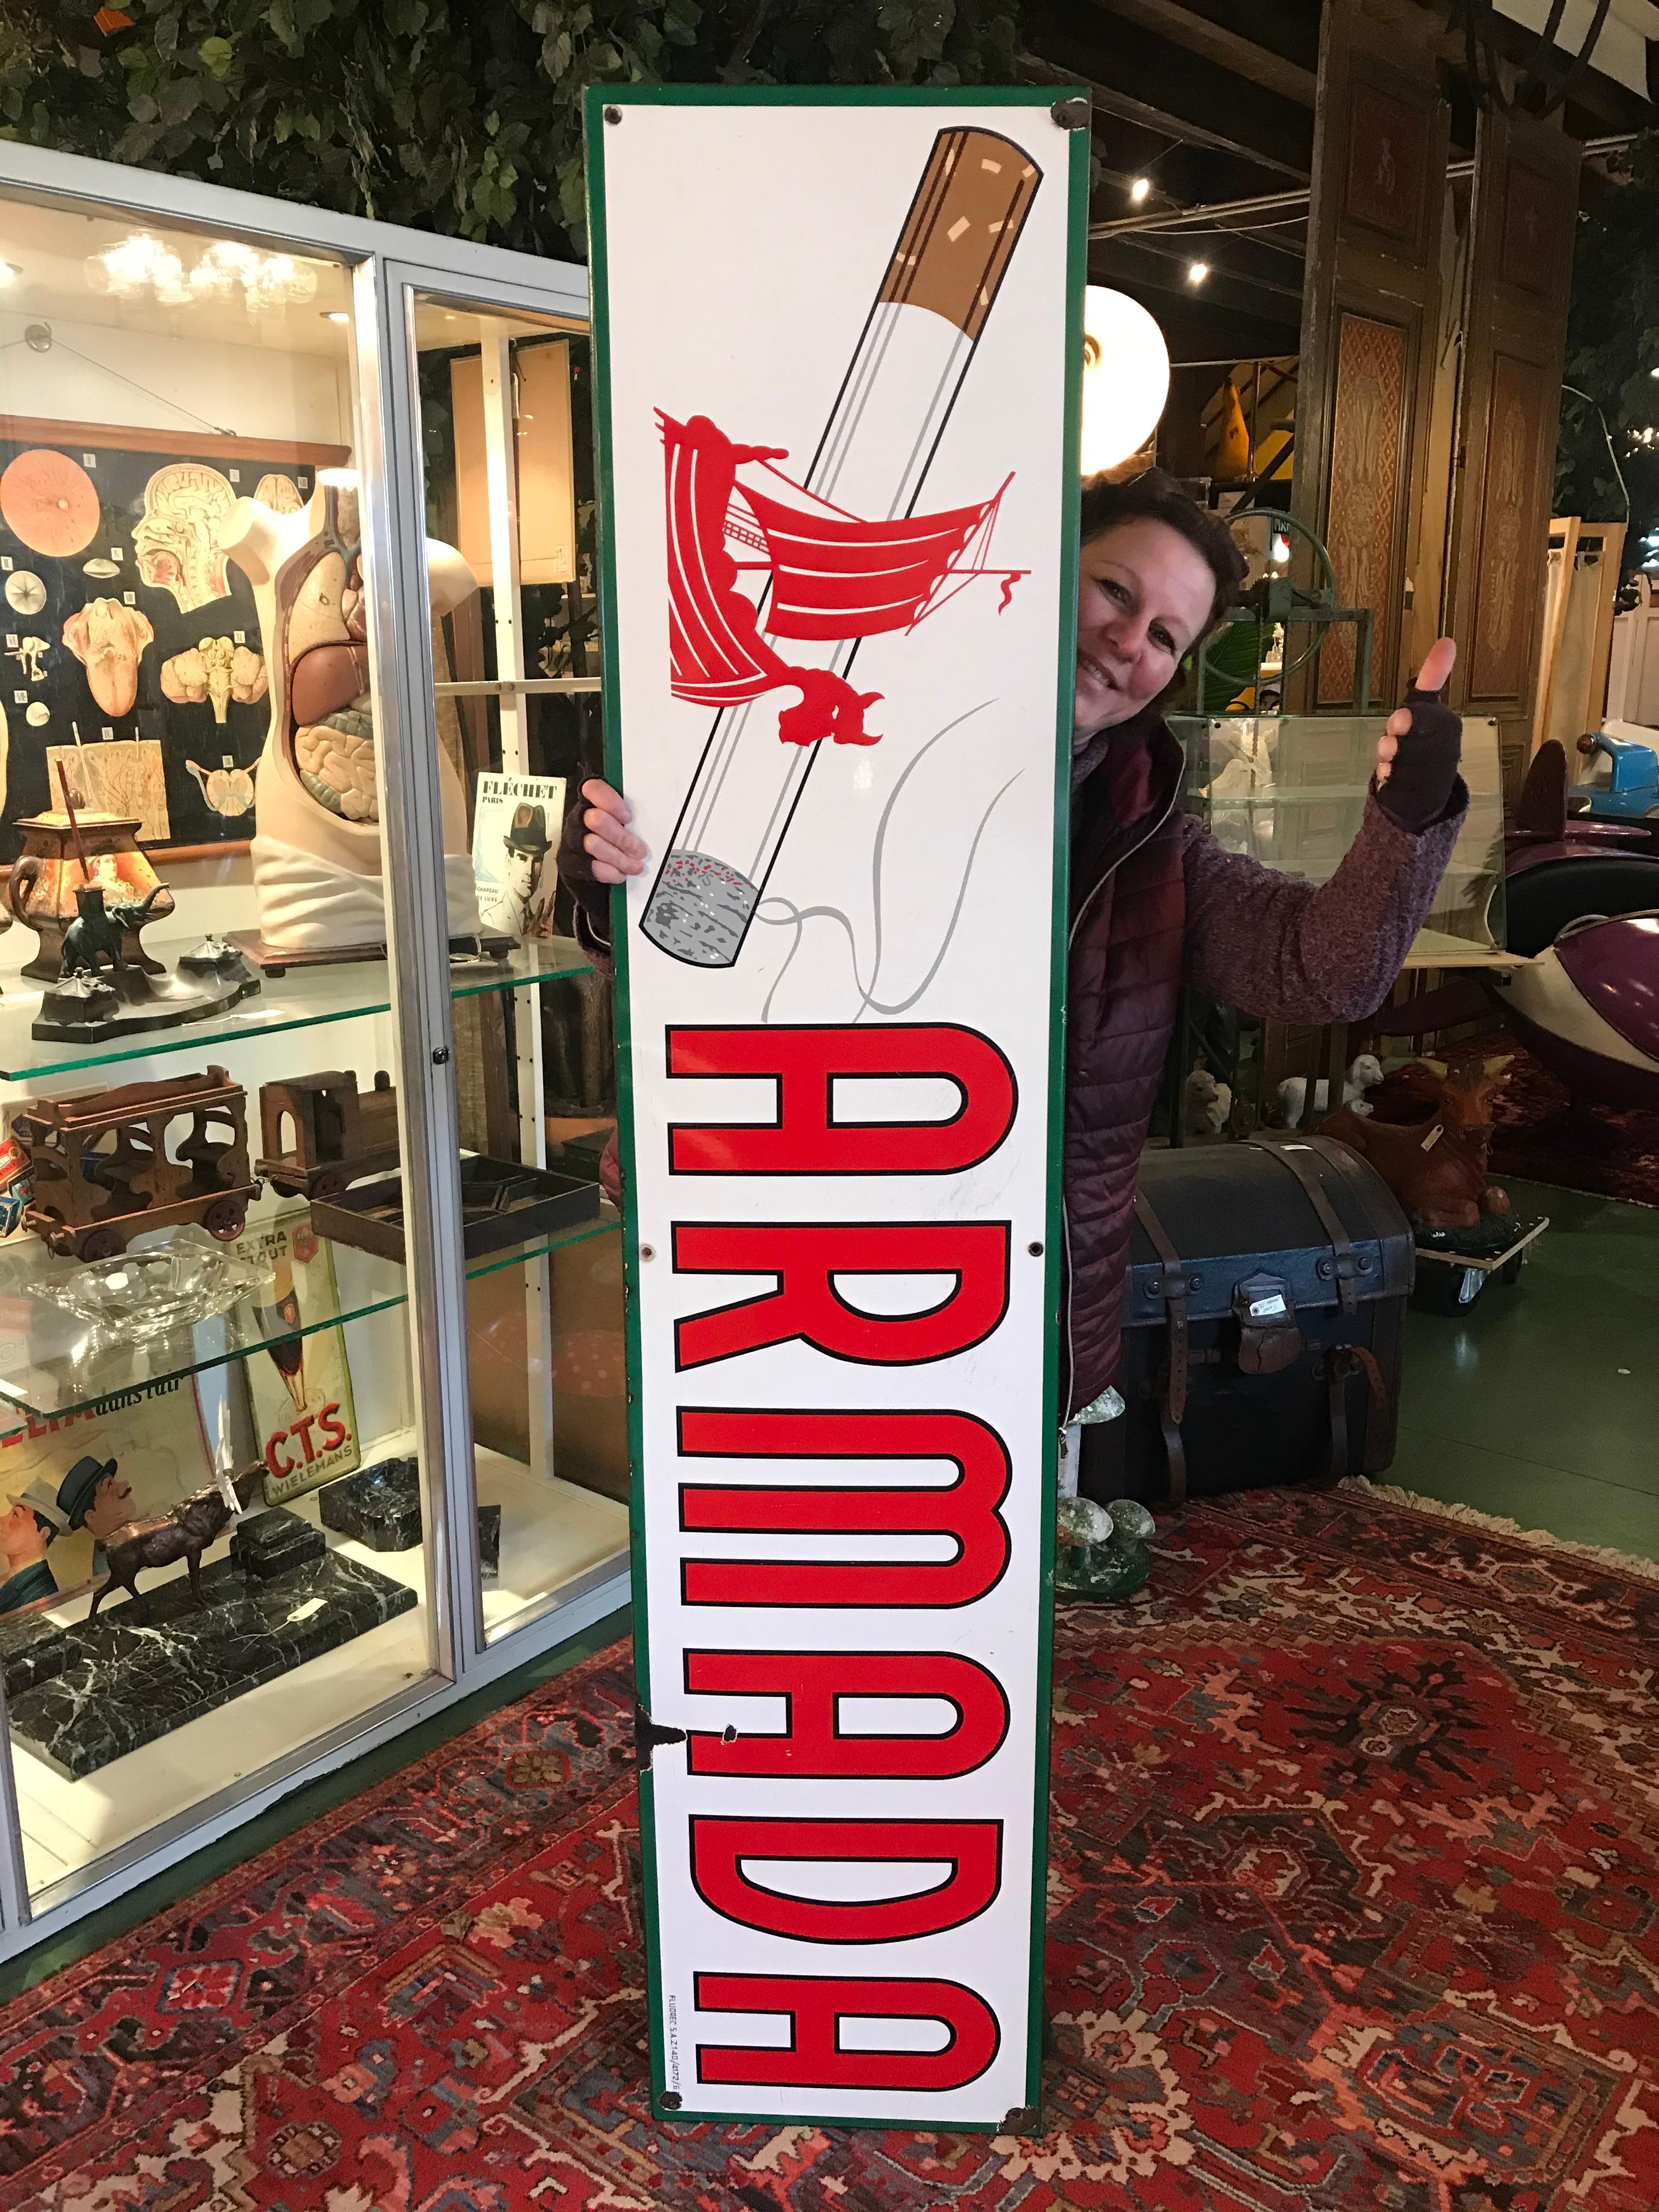 Vintage porcelain sign for Cigarettes Armada.
This cigarette sign is dated 1963. 
This large and long enamel sign dates from the 1960s. It has the color white with the brand name and logo in red and a green border all around. The logo consists of